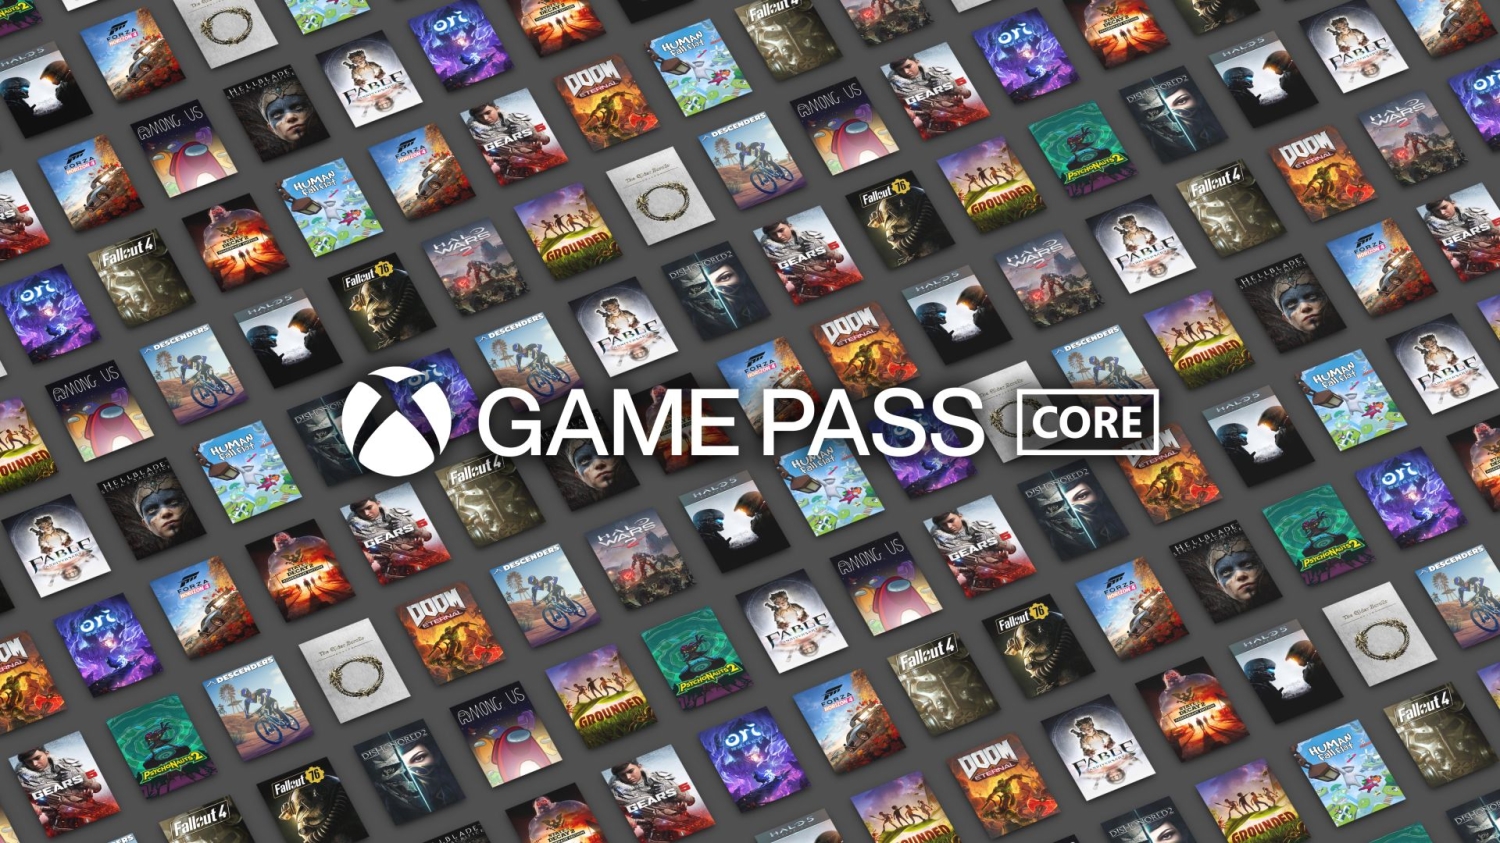 Three new games coming to Xbox Game Pass for PC